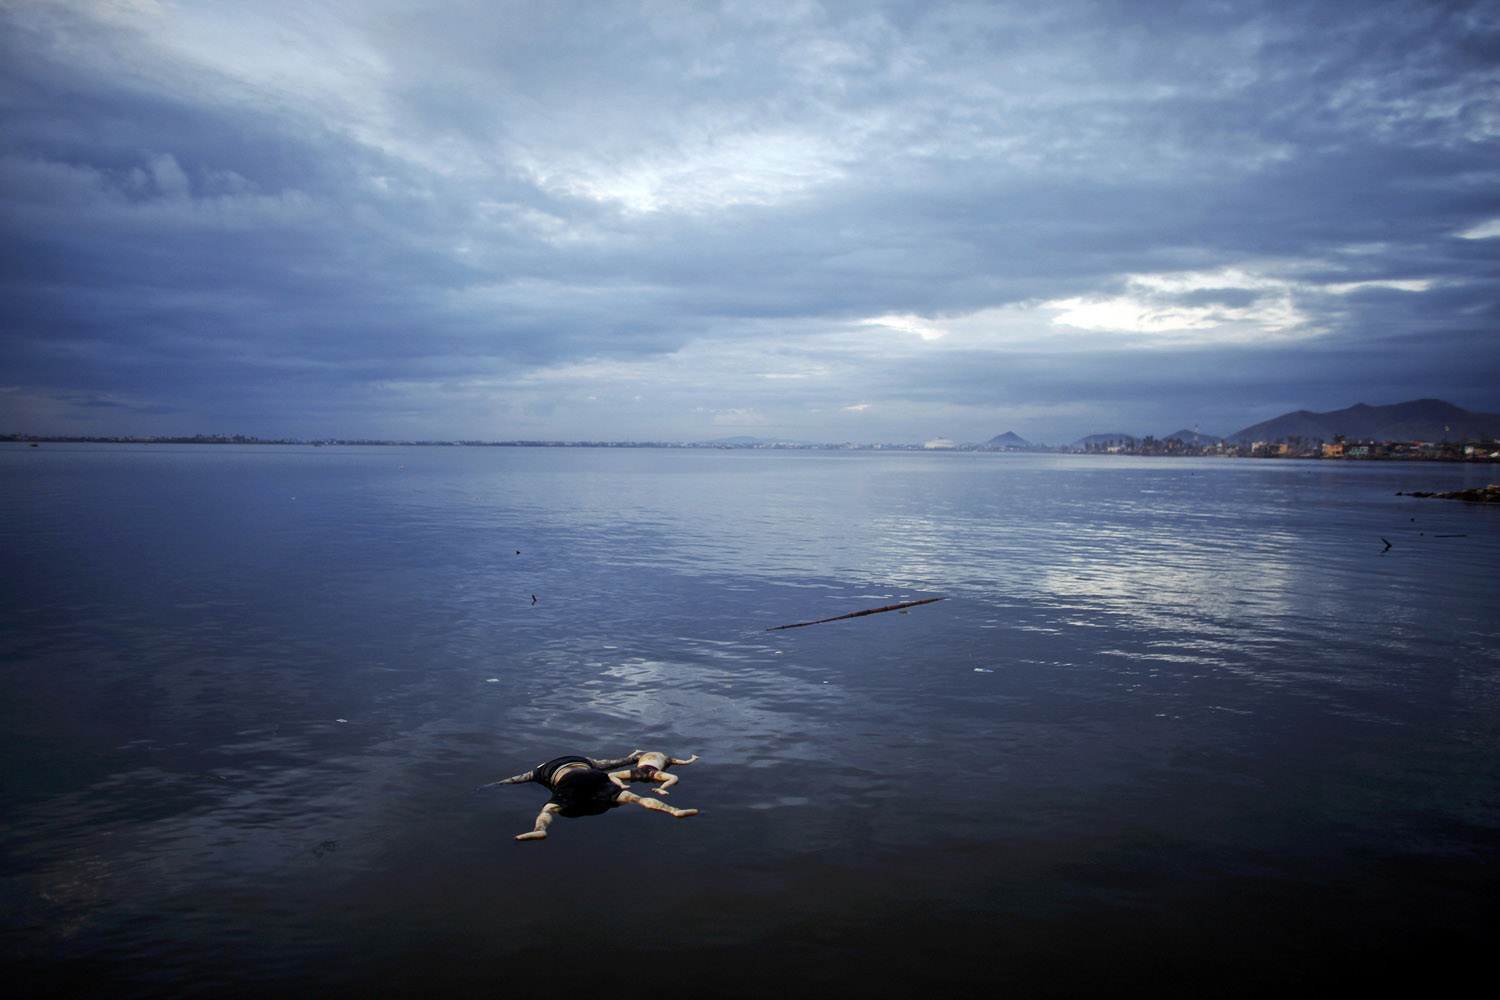 Nov. 16, 2013. Bodies of a woman and a child, victims of Typhoon Haiyan, float at sea near Tacloban.